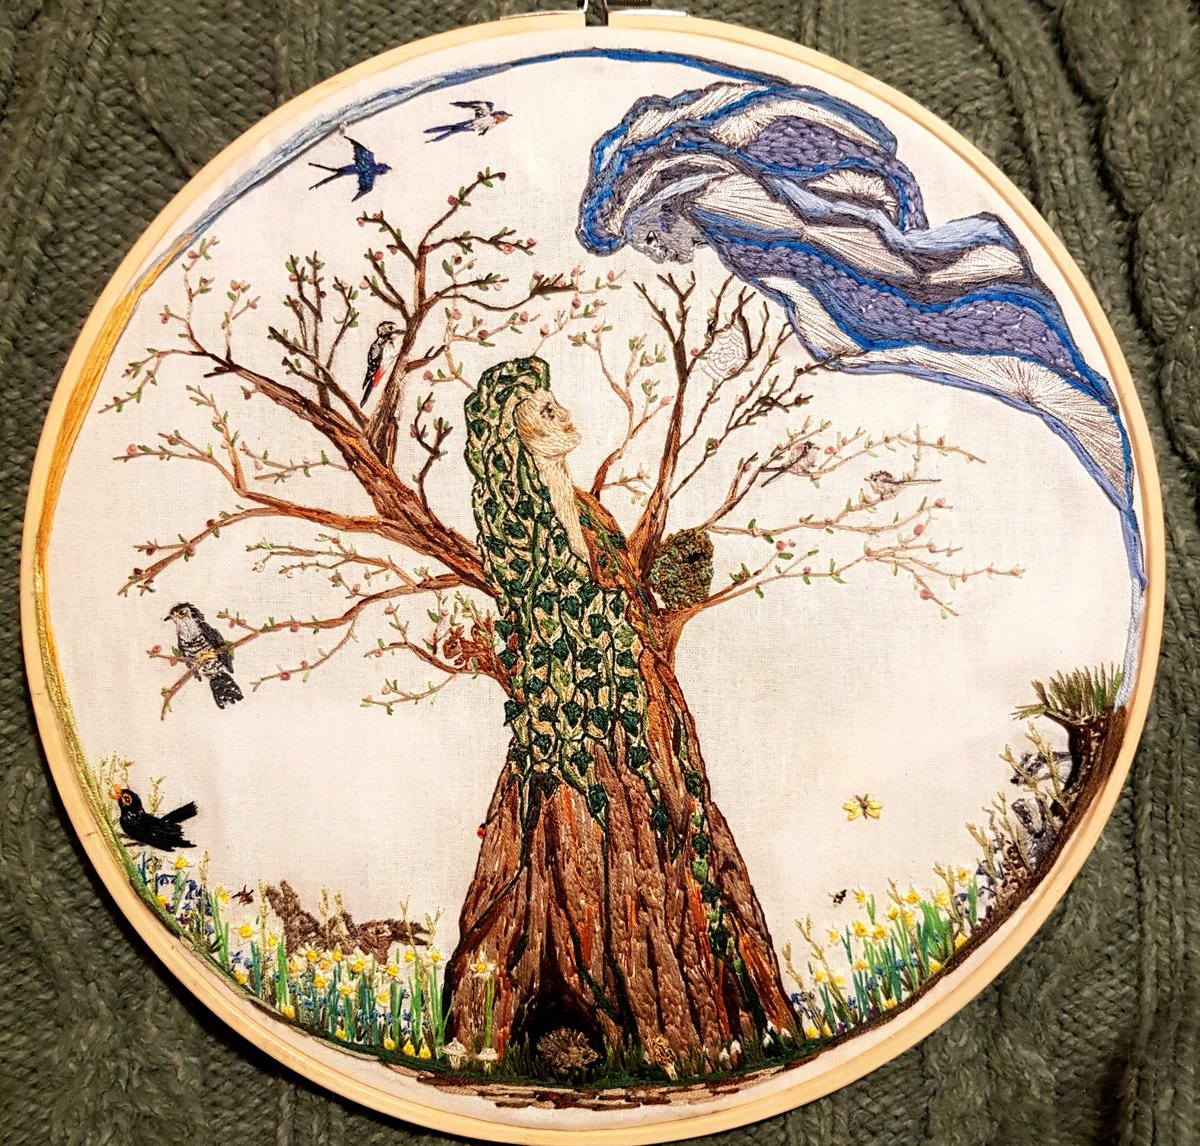 Just been out for a walk and right on cue Brimstones appeared everywhere...I love seeing the signs of spring, and embroidering them...this piece from 2022... #SpringEquinox